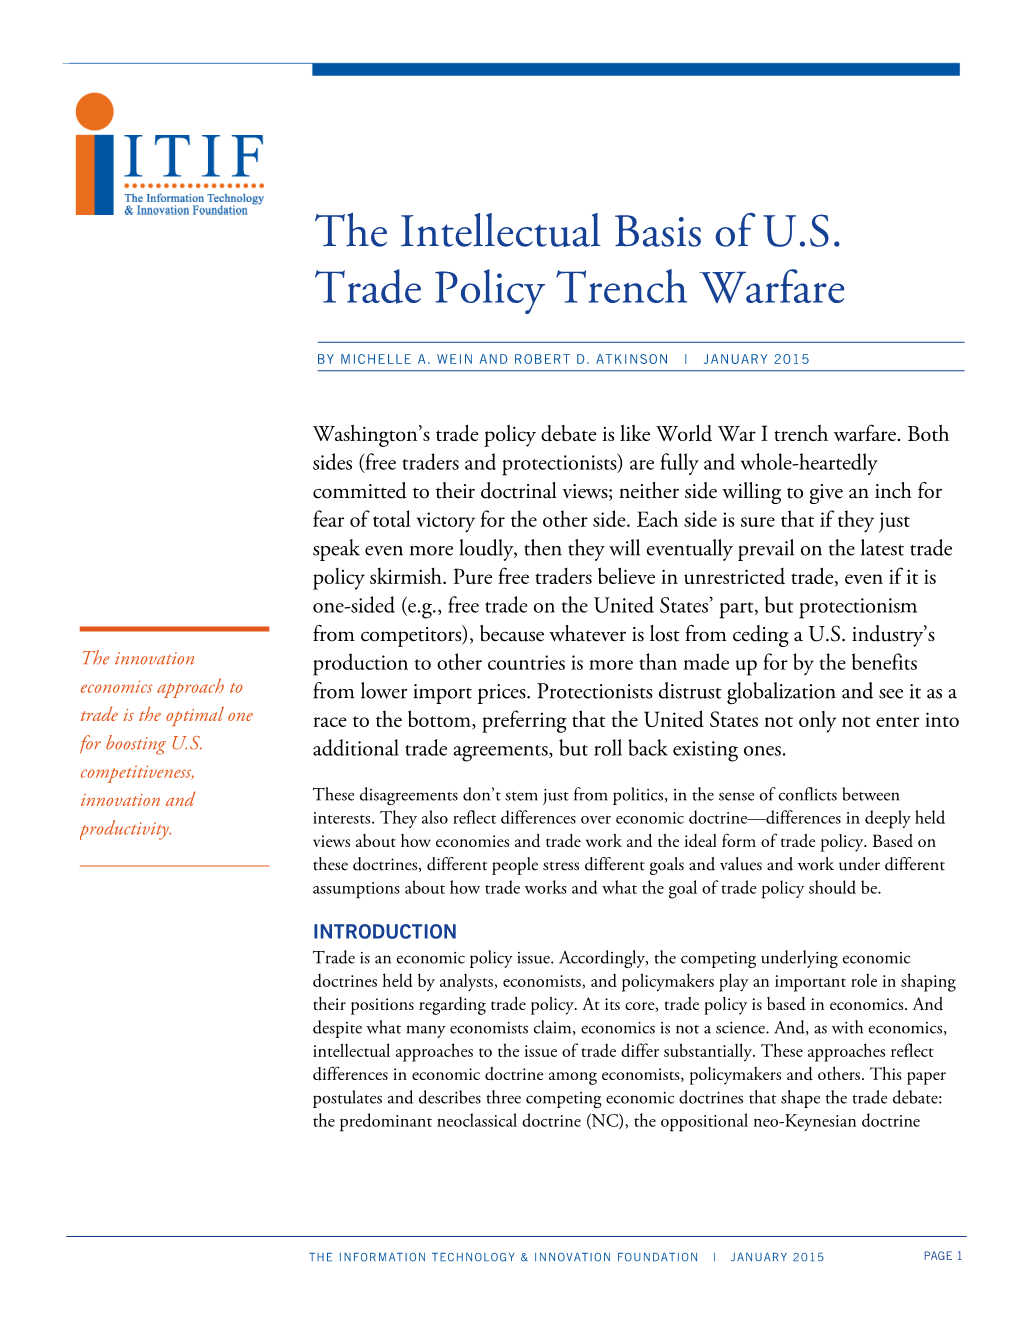 The Intellectual Basis of U.S. Trade Policy Trench Warfare